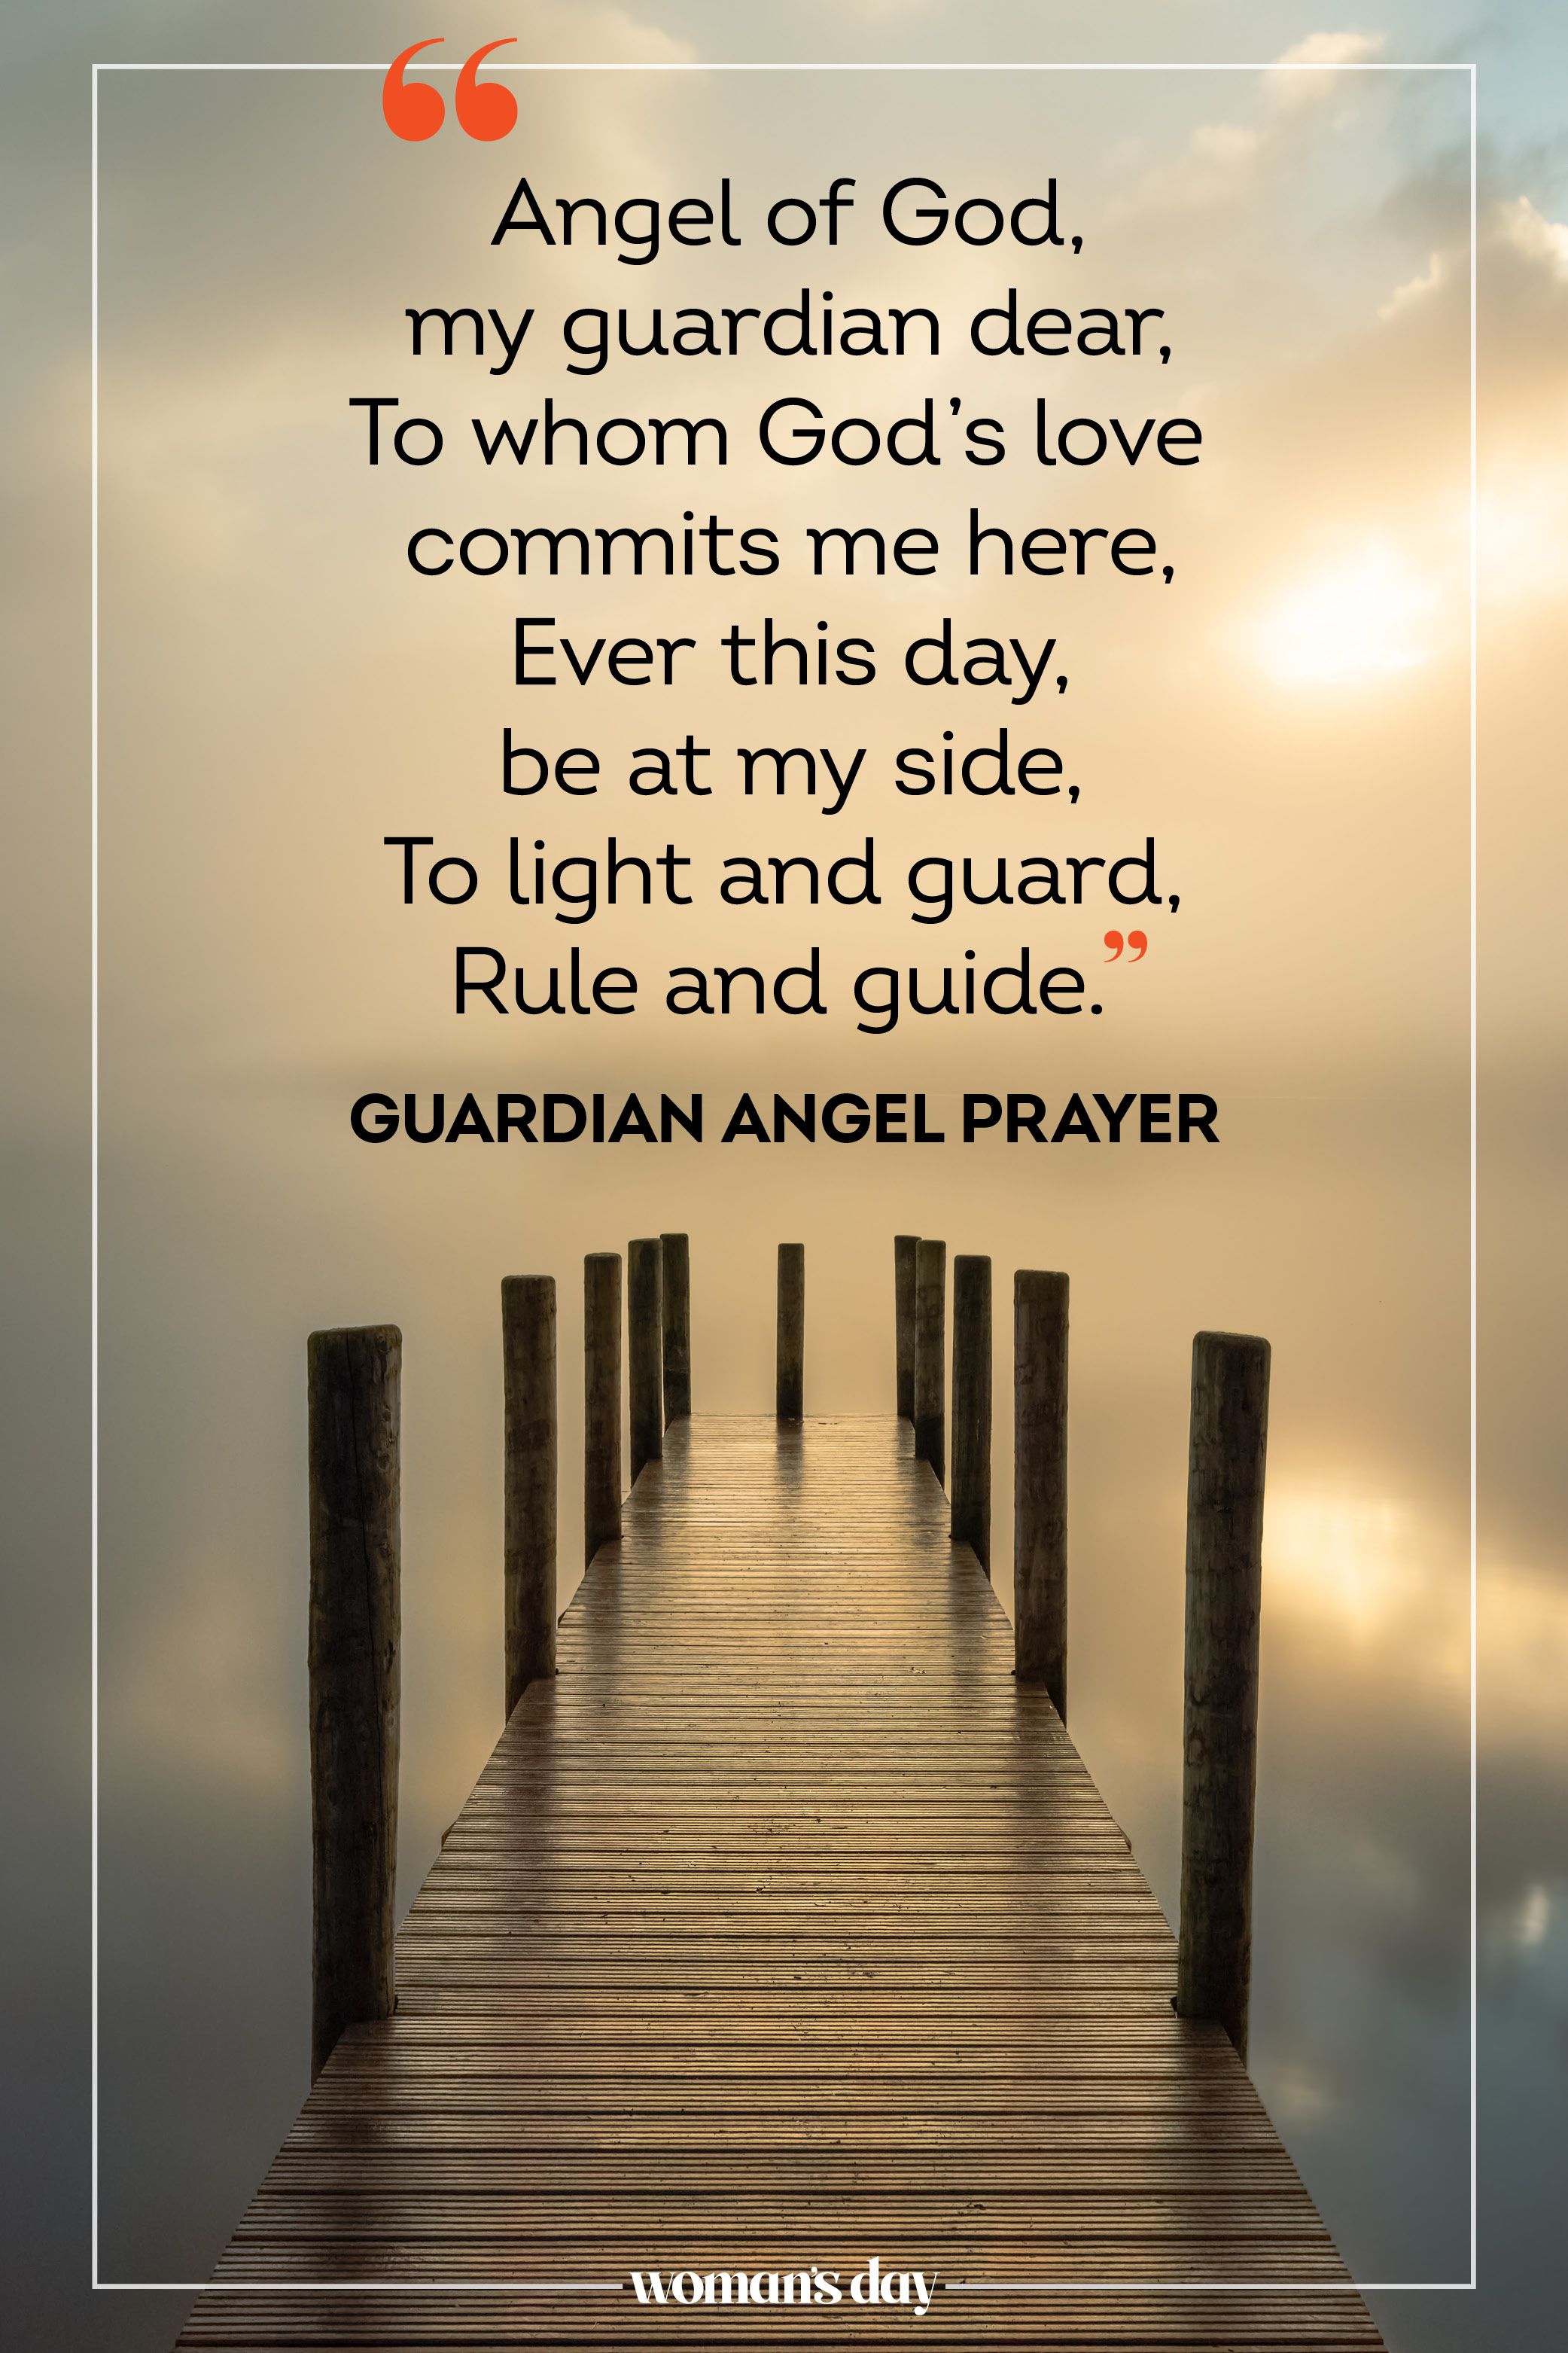 prayer images with words